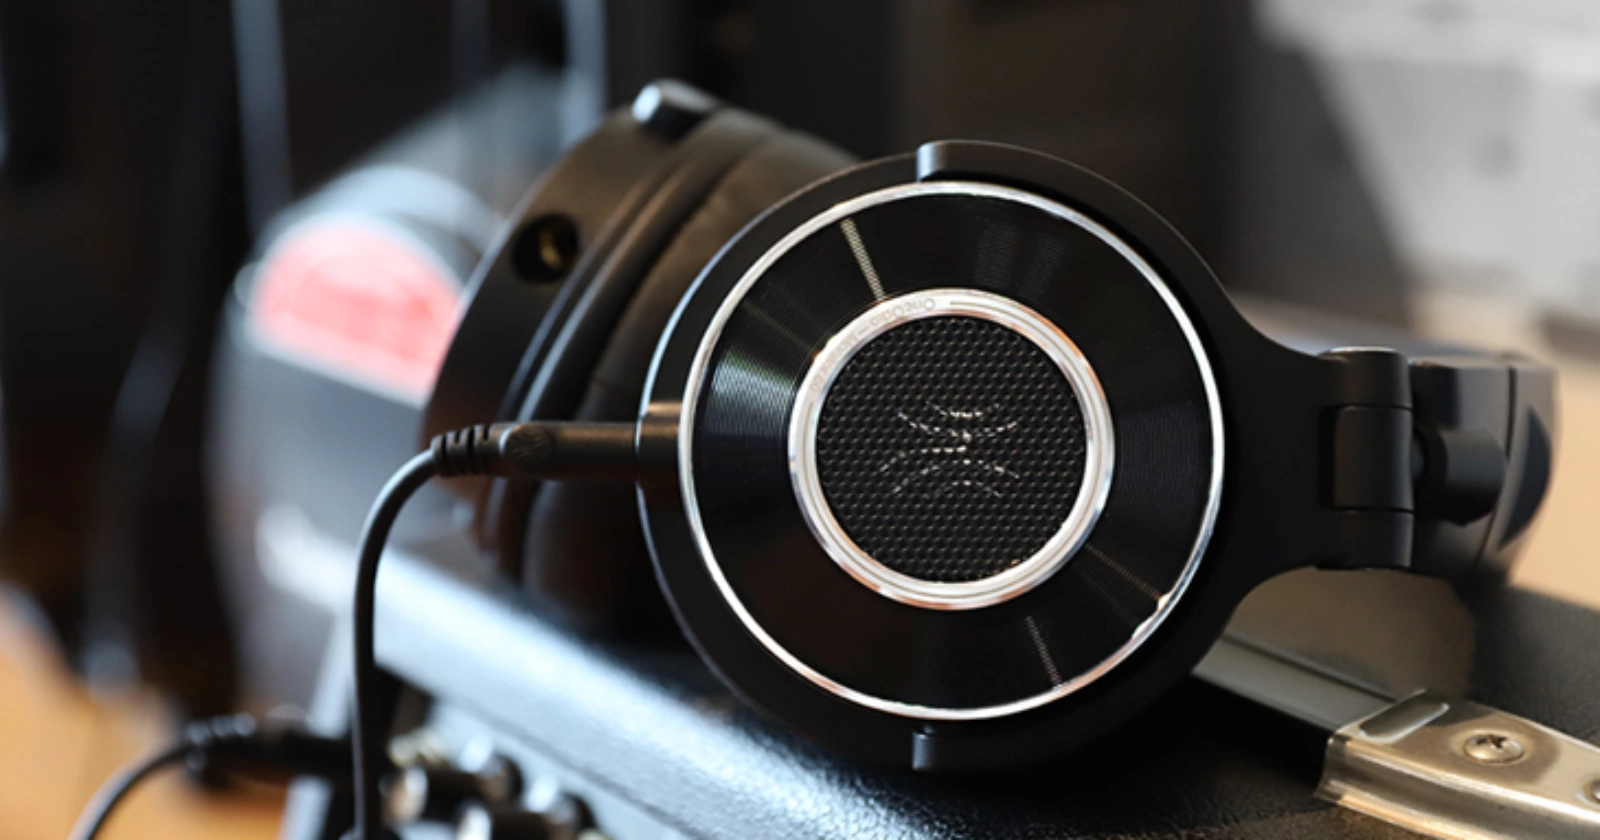 Experience superior sound with the OneOdio Monitor 60 headphones